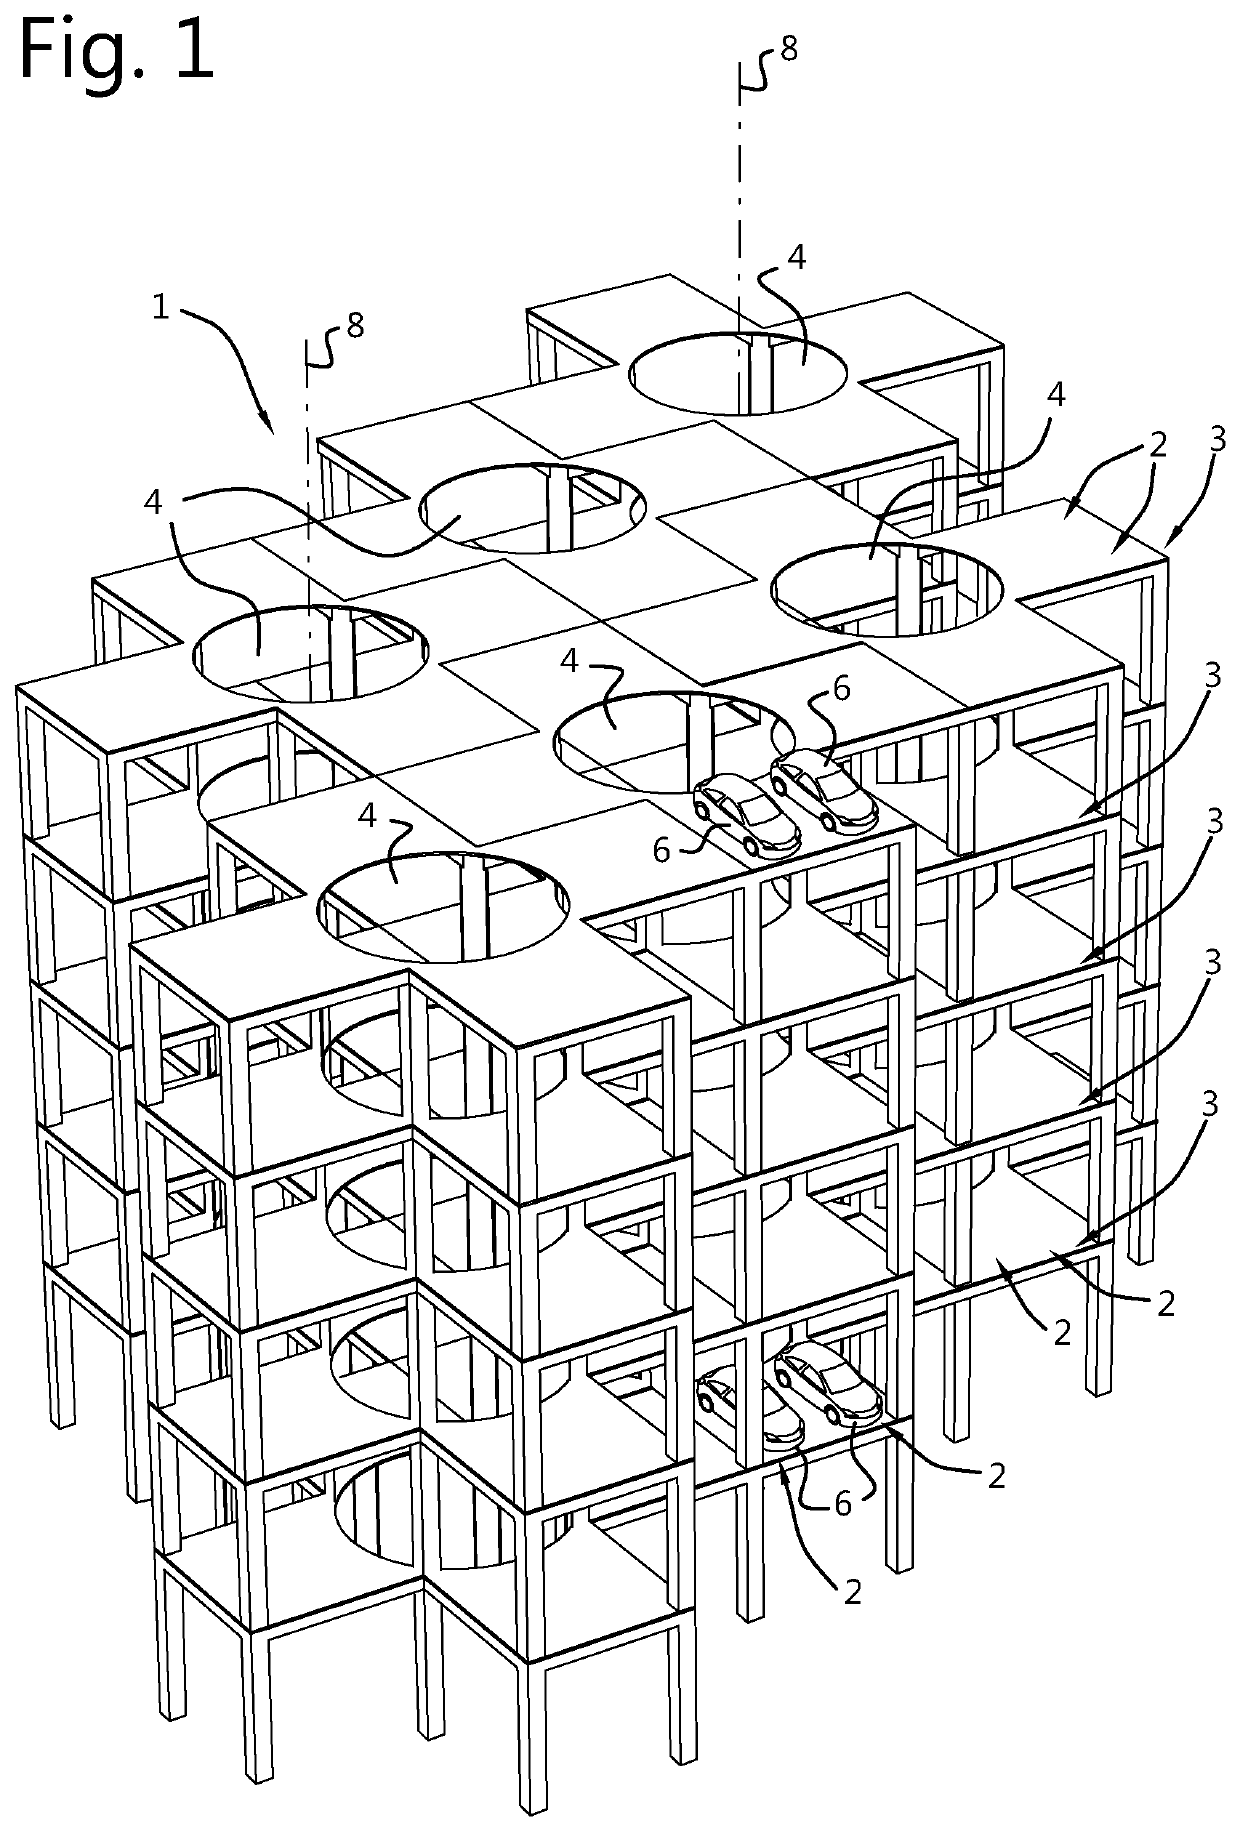 Compact multi-tier parking garage and method for storing vehicles in such a parking garage